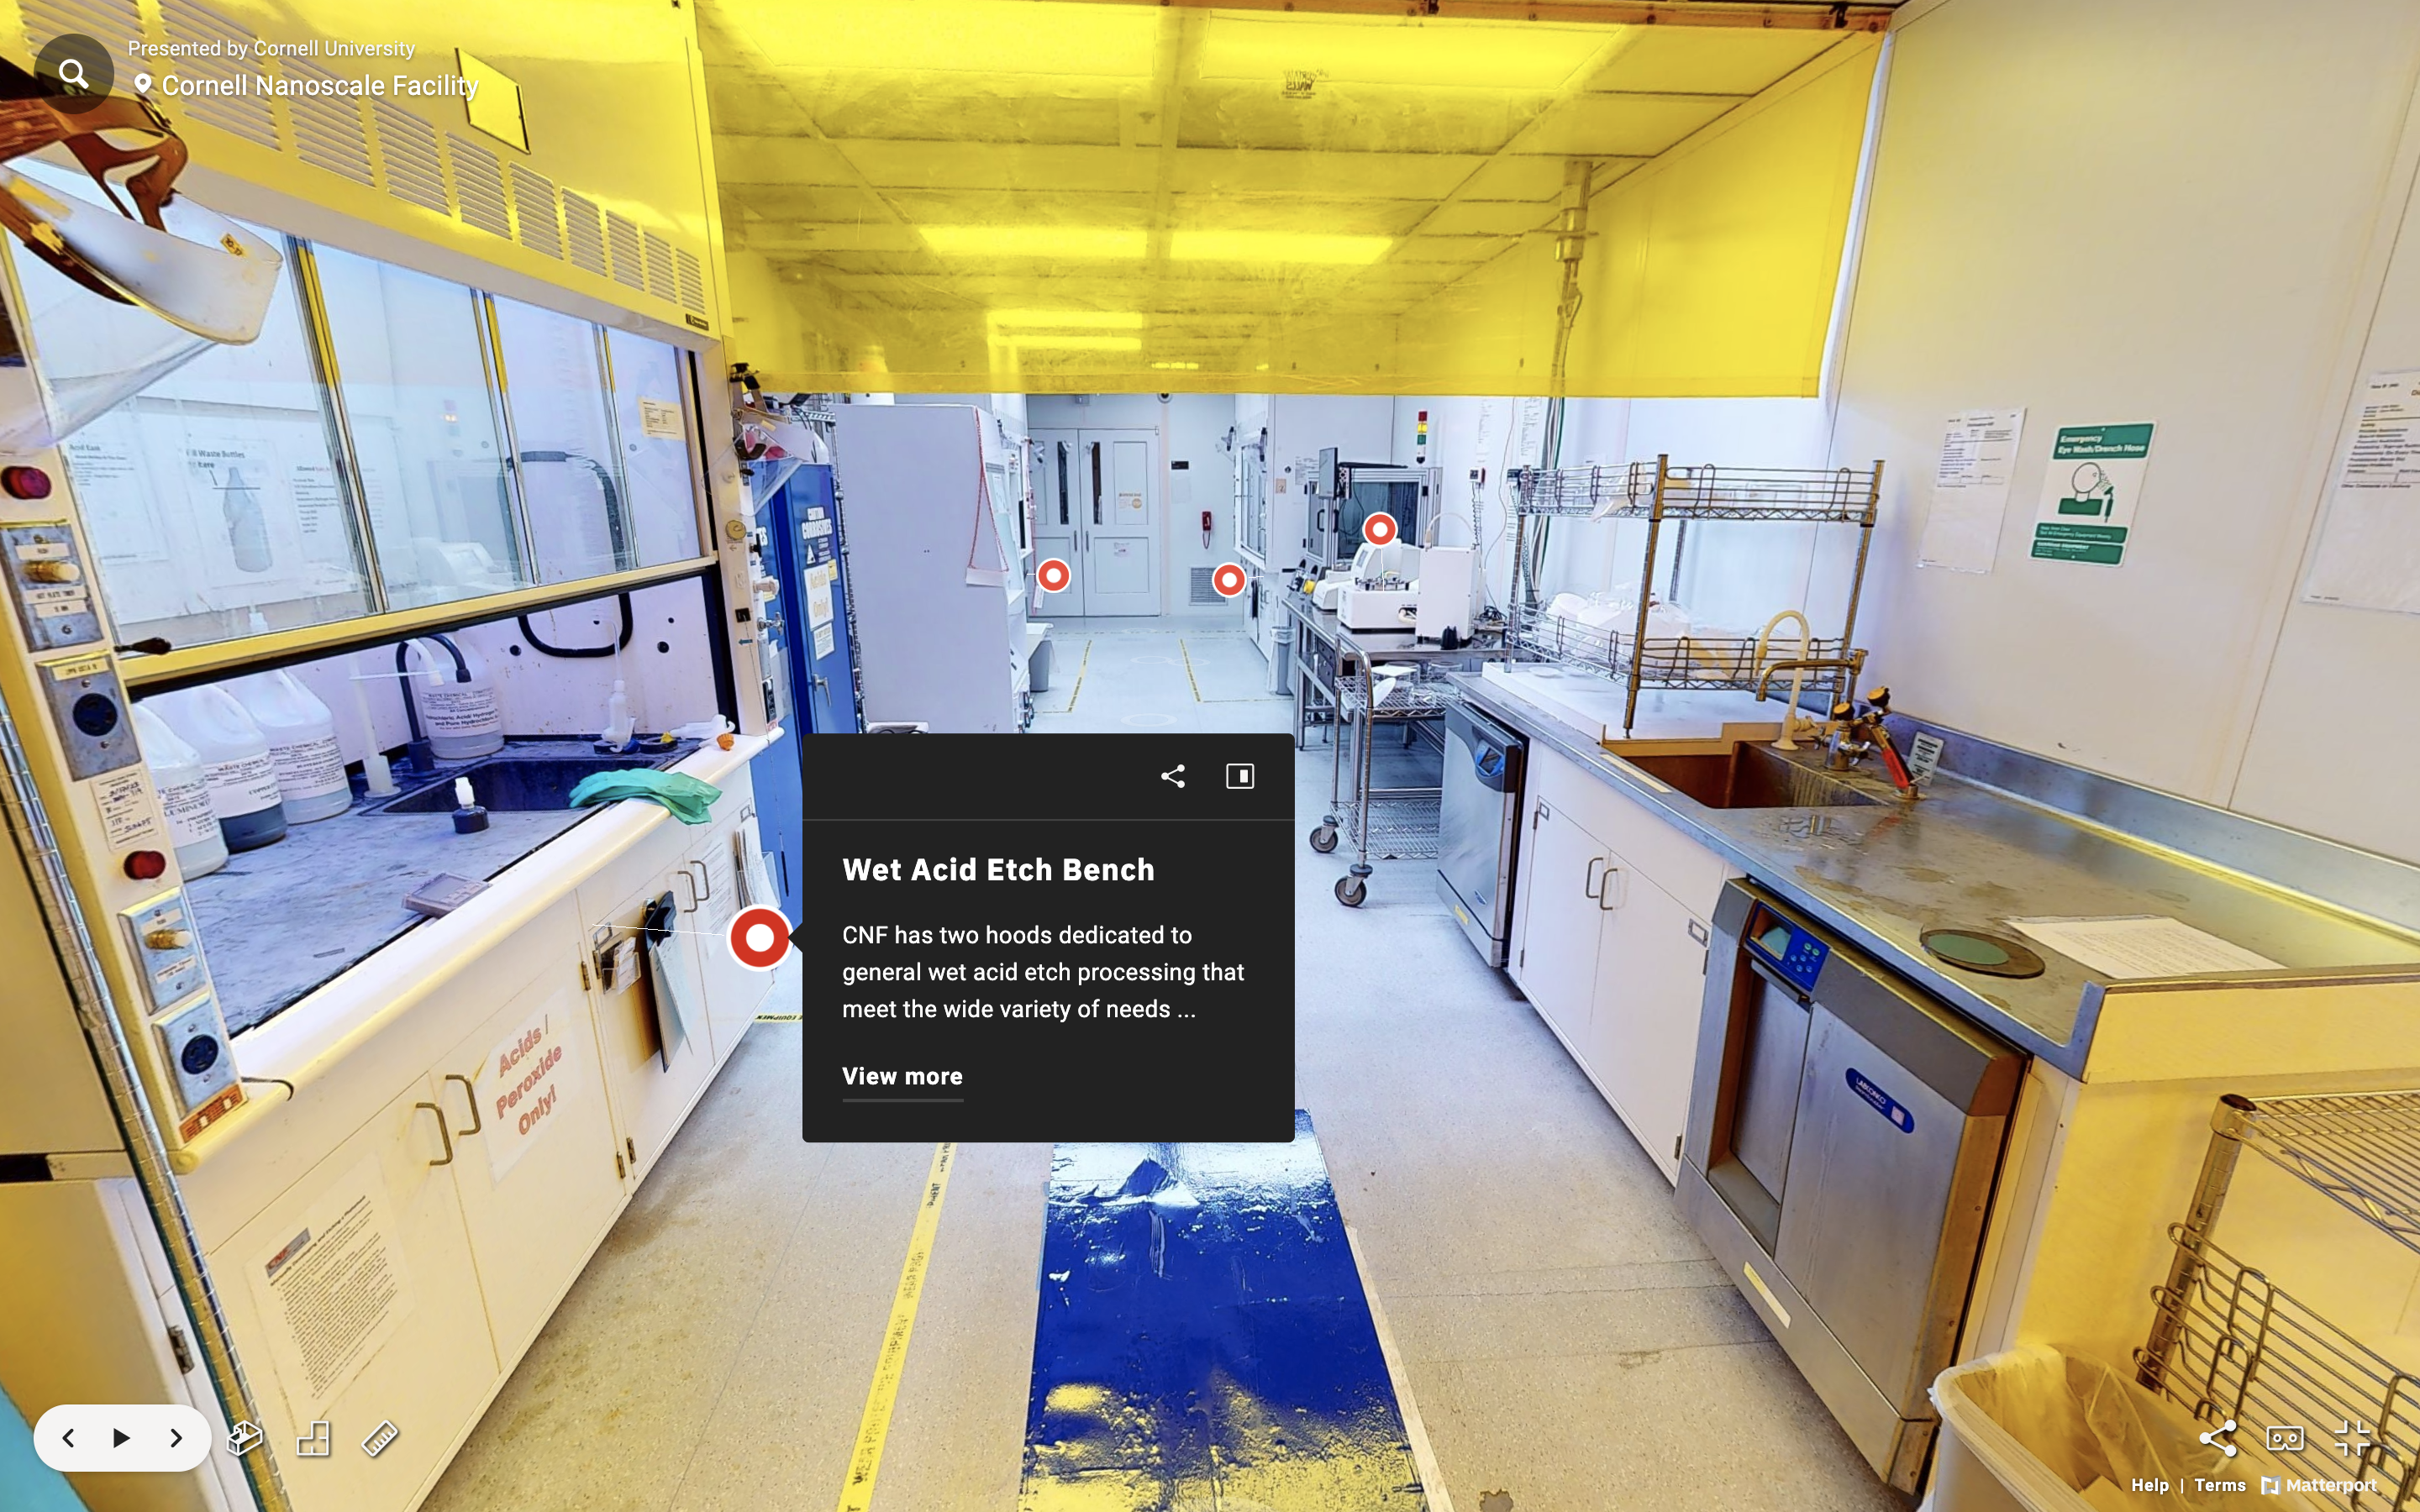 First person Cleanroom viewing with Wet Acid Etch Bench annotation